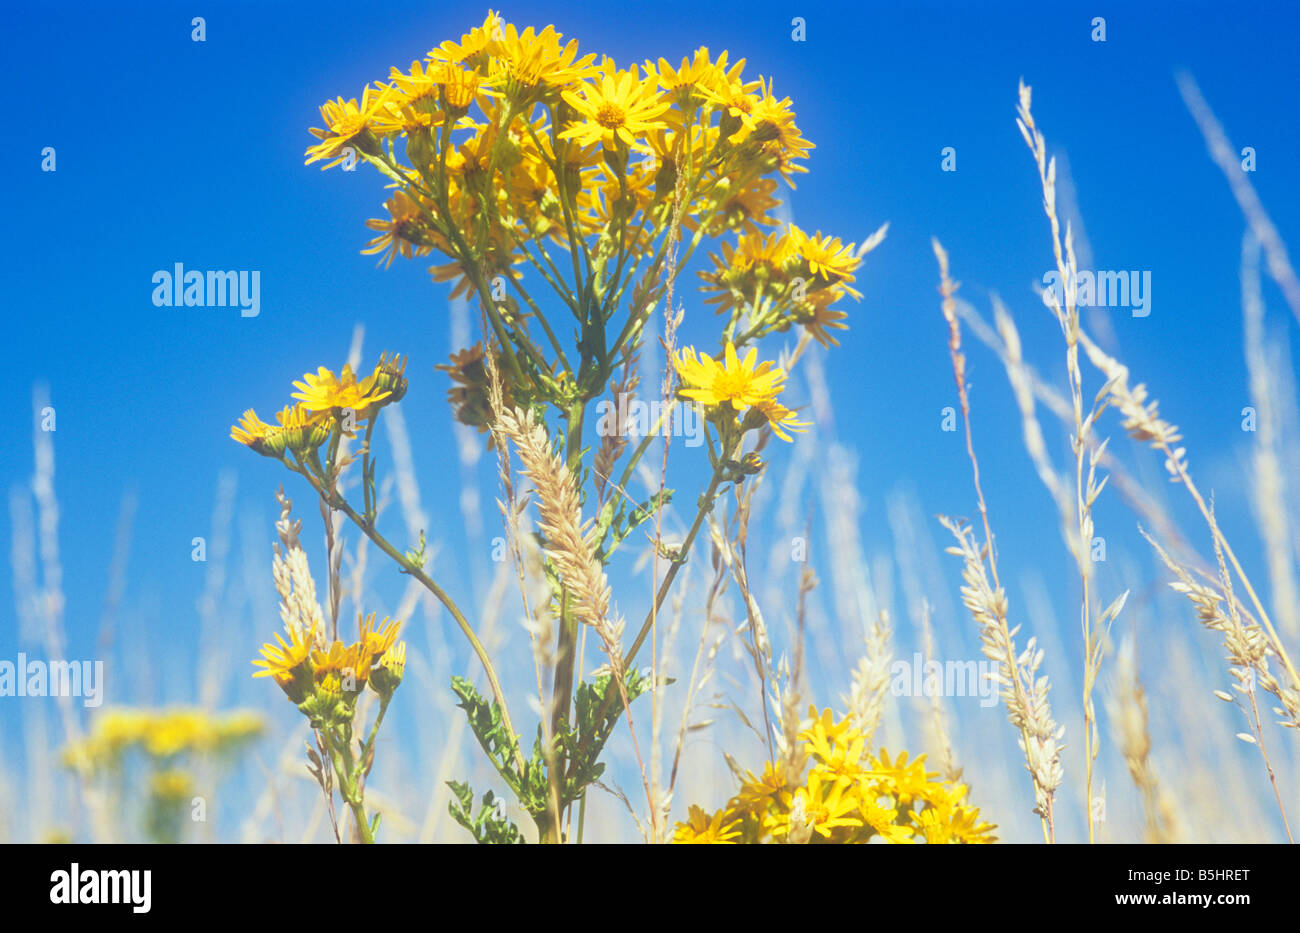 Close up at ground level of stem and yellow flowers of Common ragwort surrounded by dry Red fescue grass against blue sky Stock Photo